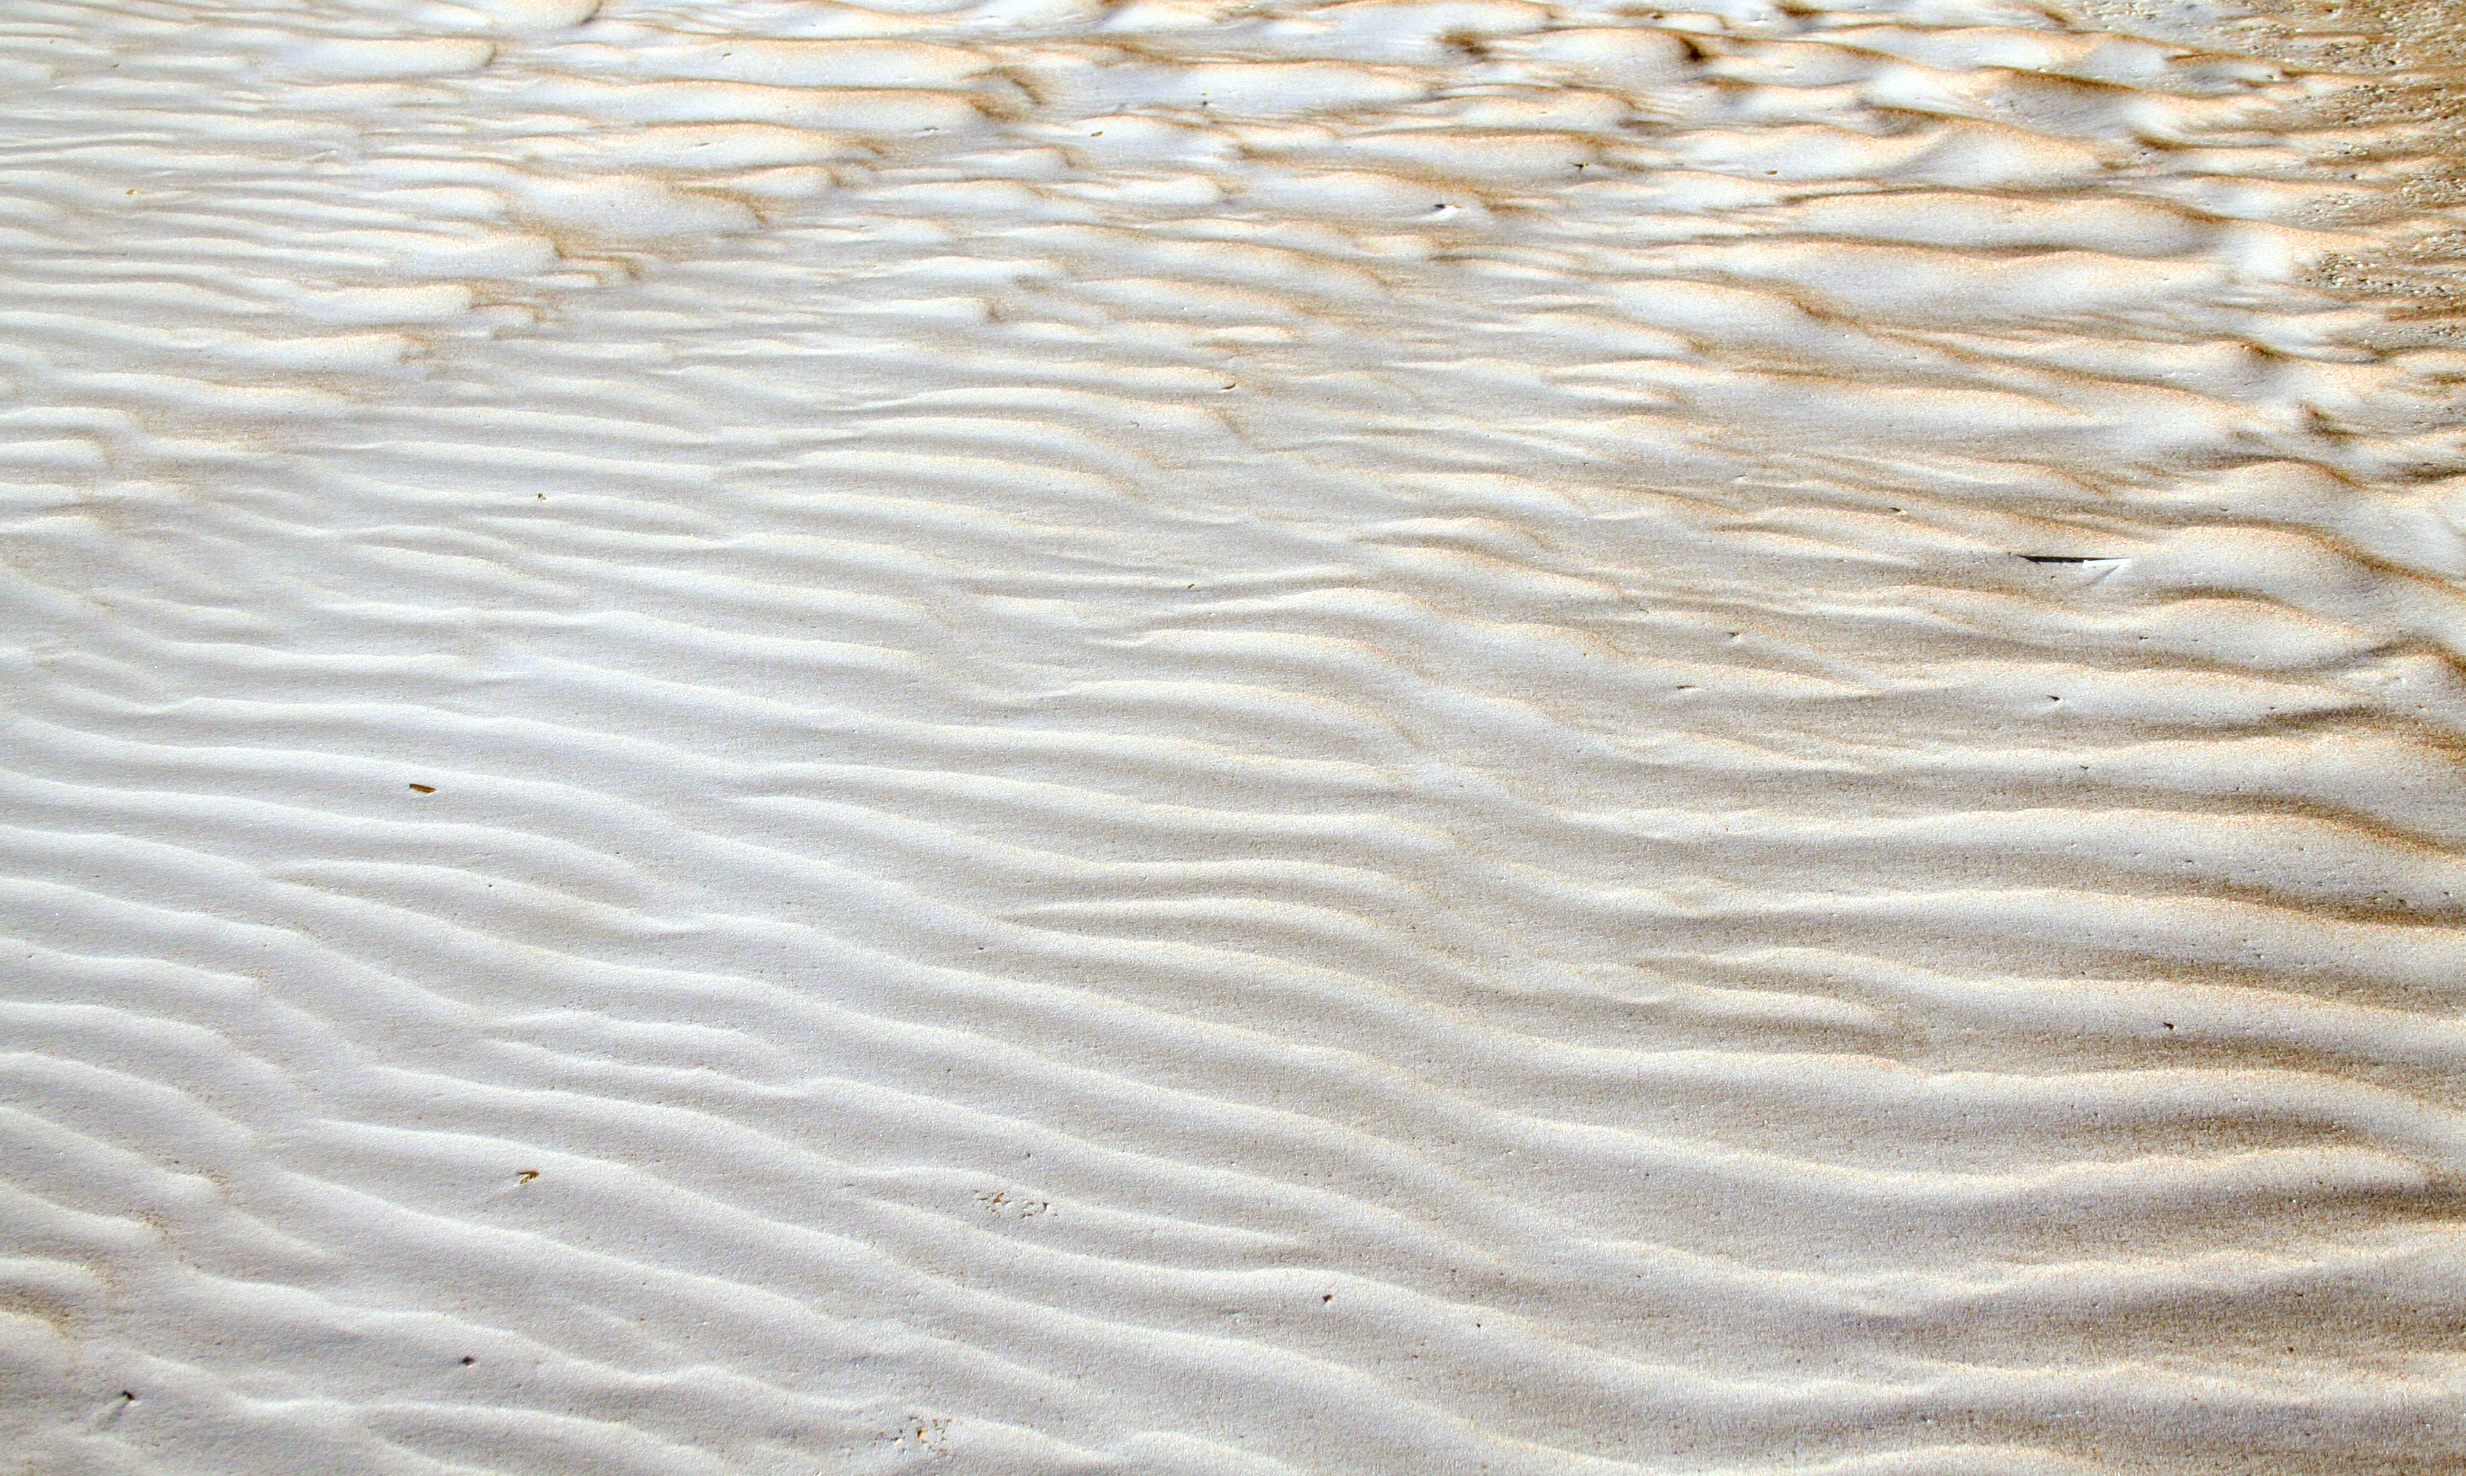 Ripples texture sand shore brown free image download